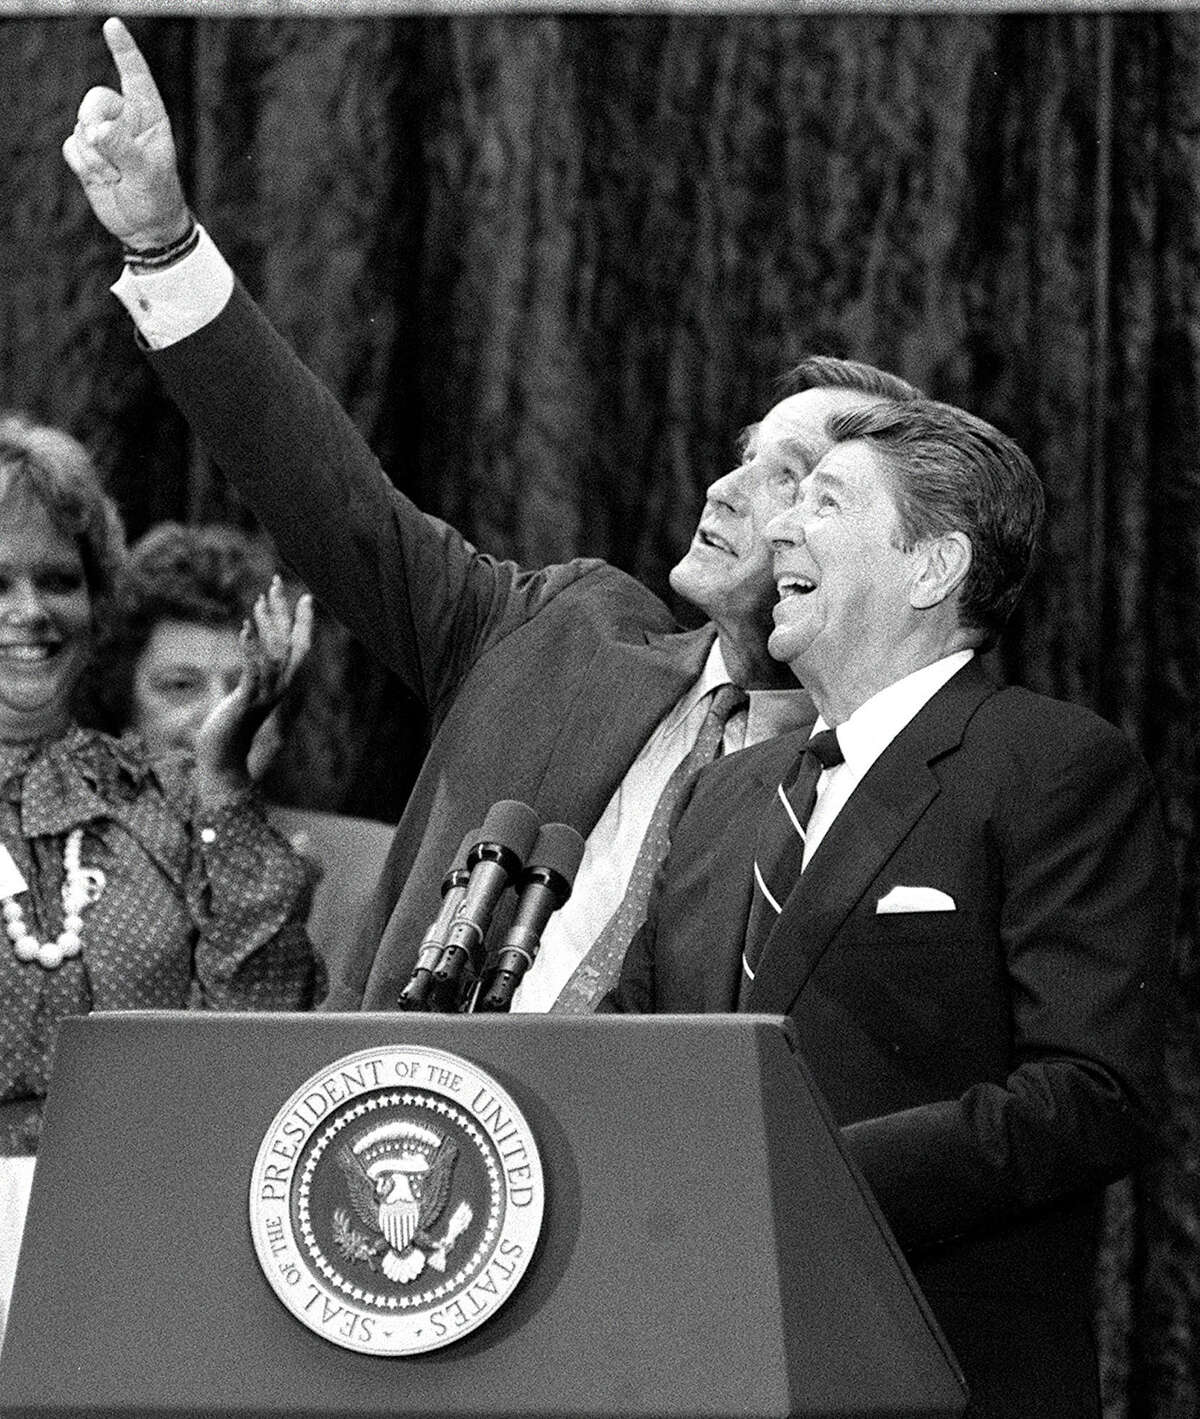 President Ronald Reagan and Vice President George H.W. Bush react to cheering suppporters and falling balloons at a rally at the Republican National Convention in Dallas, Texas, August 19, 1984.